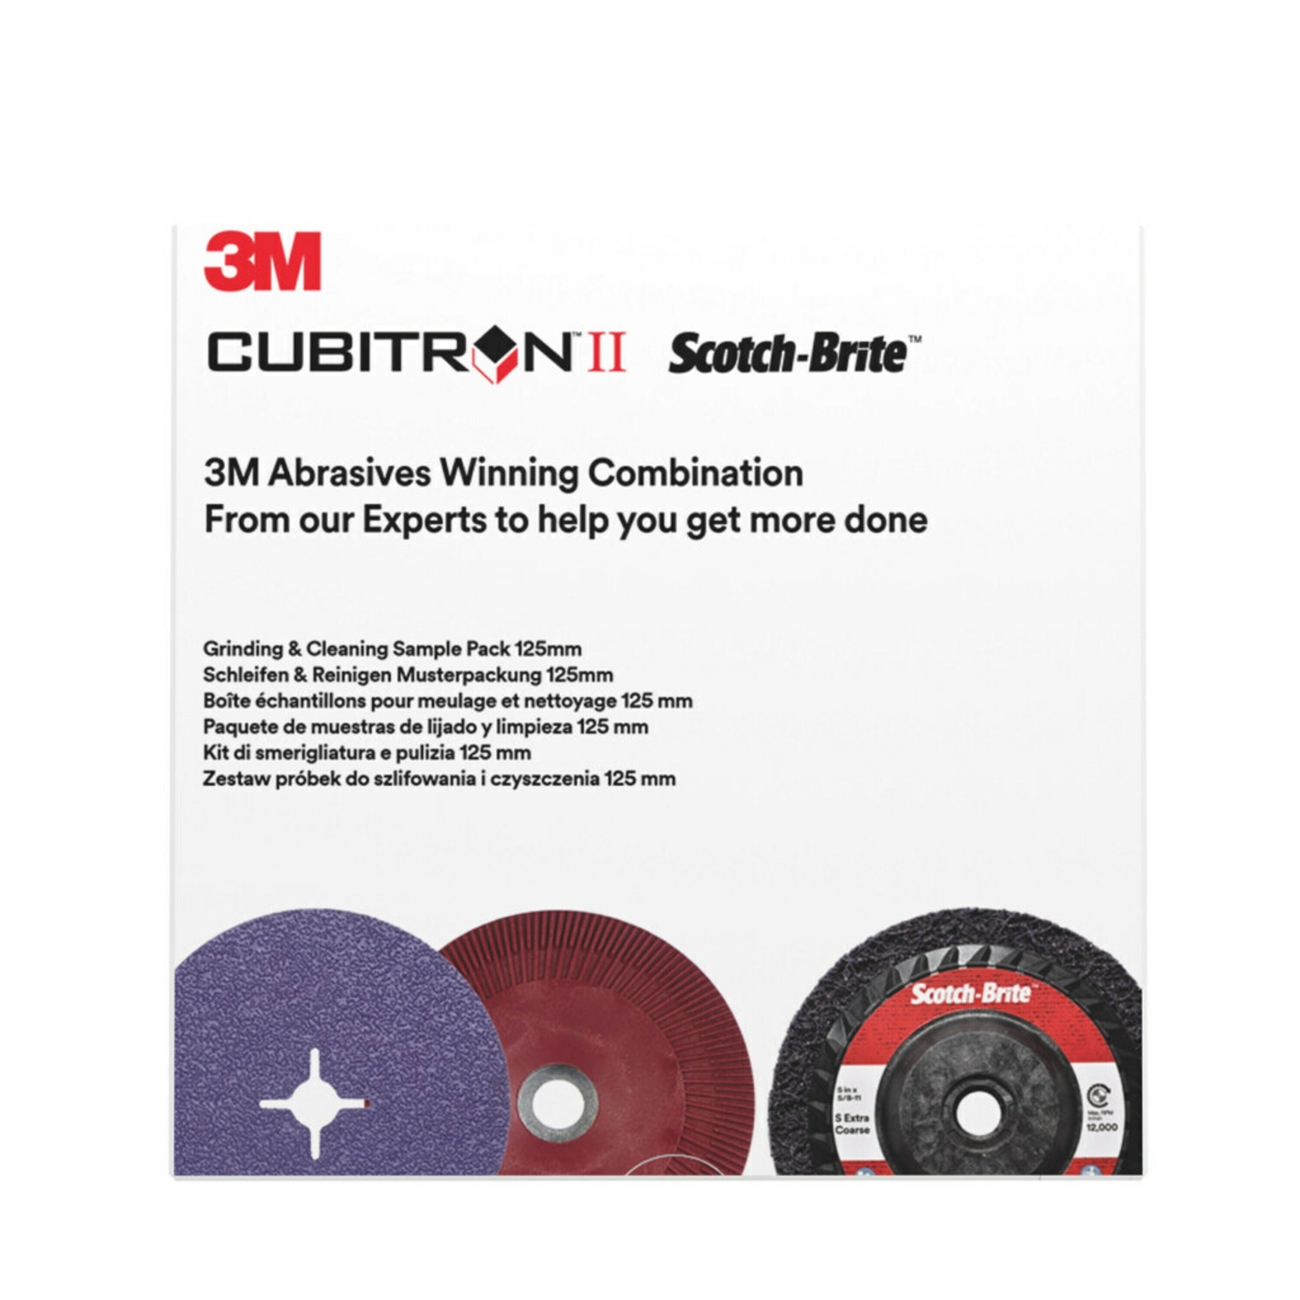 3M sanding and cleaning set, 3x 125 mm 3M Cubitron II fiber disc 982CX P36 and 1x Scotch-Brite Clean and Strip XT Pro S coarse cleaning disc 125 mm, with 1x high-performance fiber disc backing pad